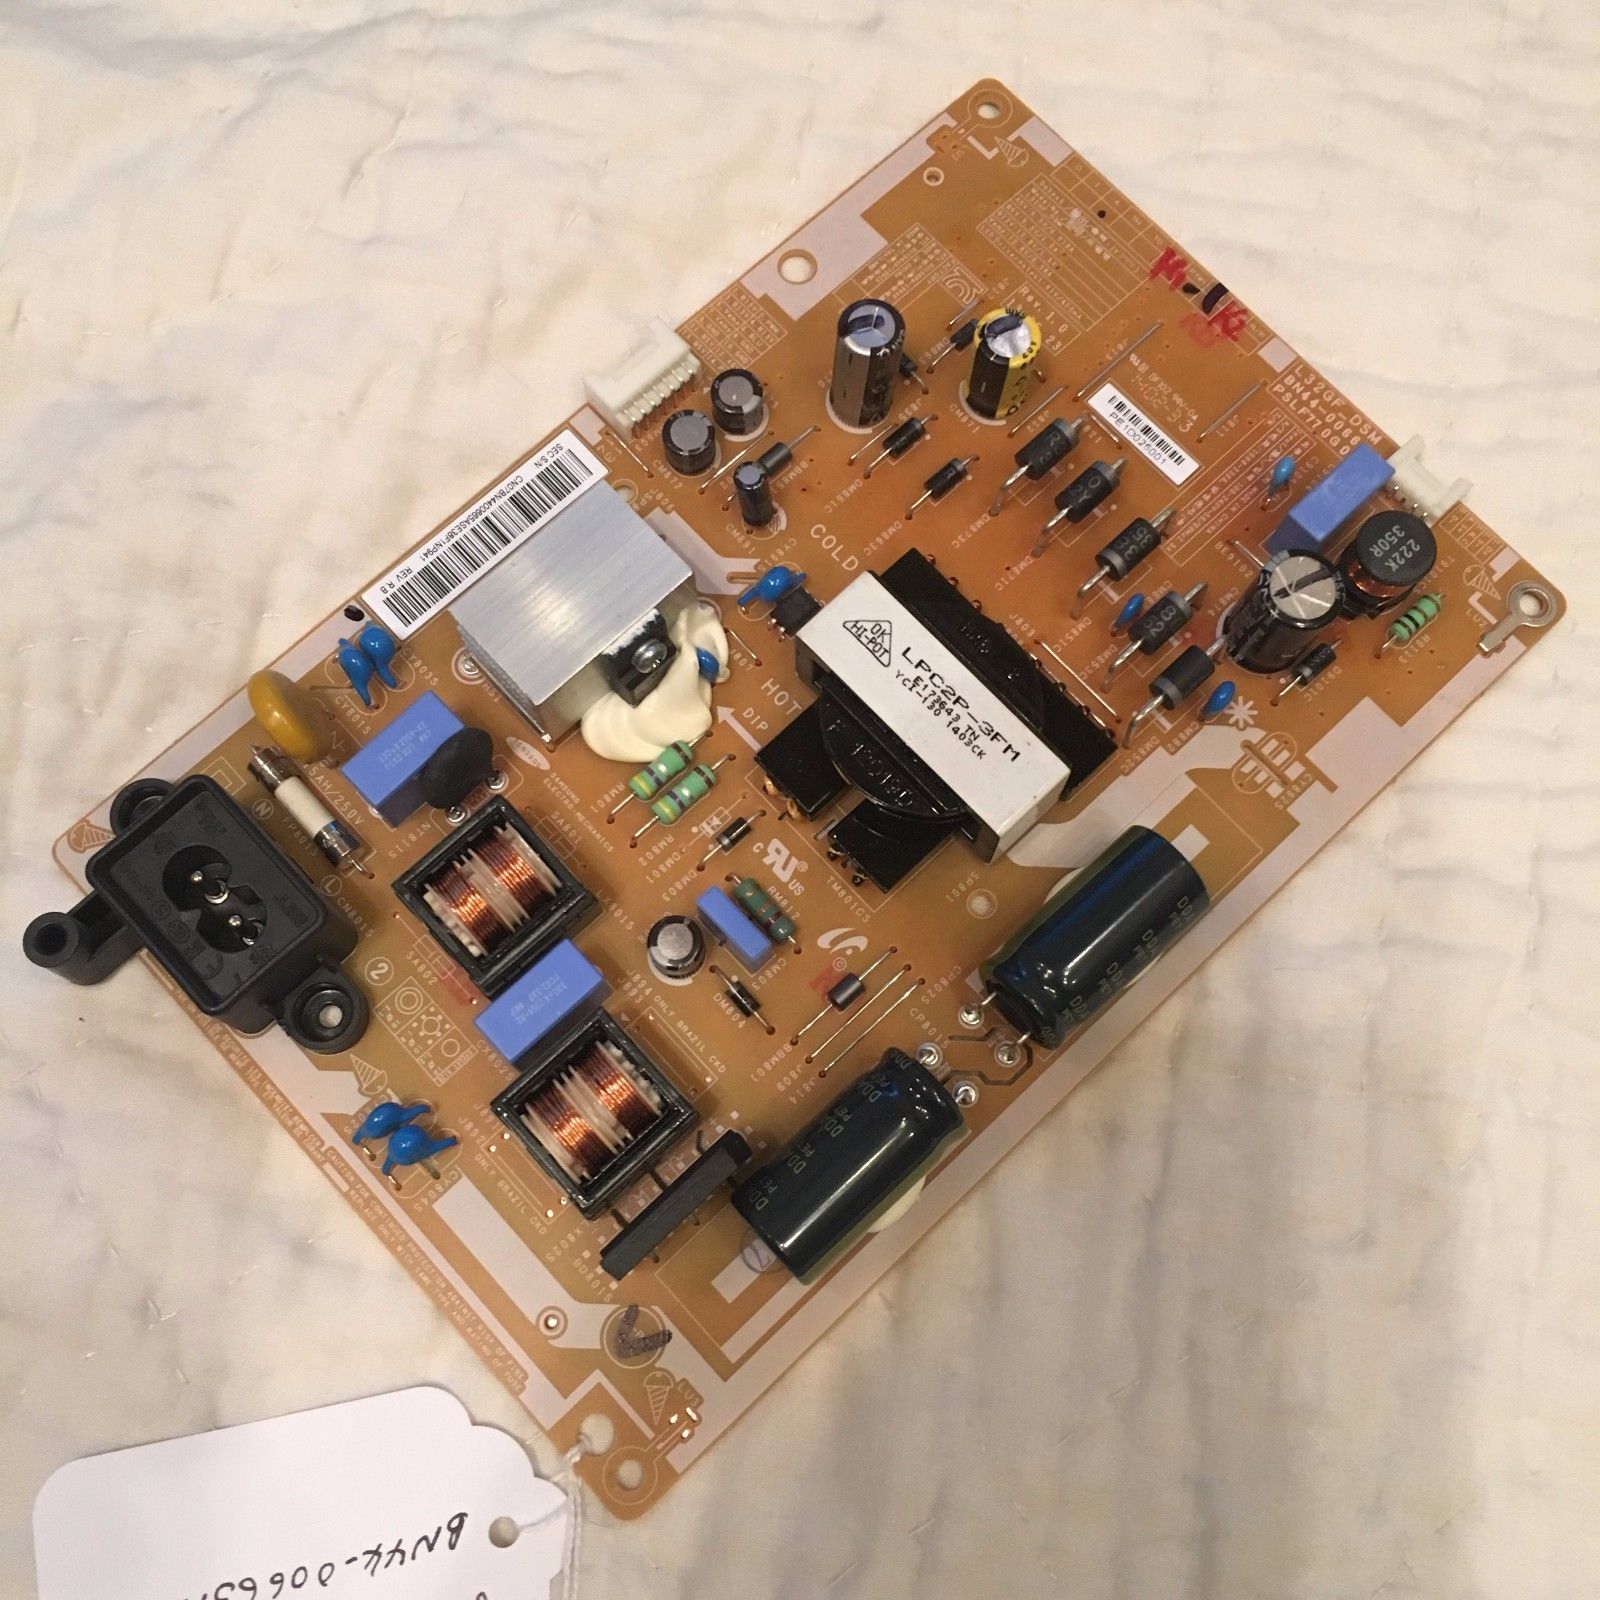 NEW SAMSUNG BN44-00665A POWER SUPPLY BOARD FOR UN32EH5300